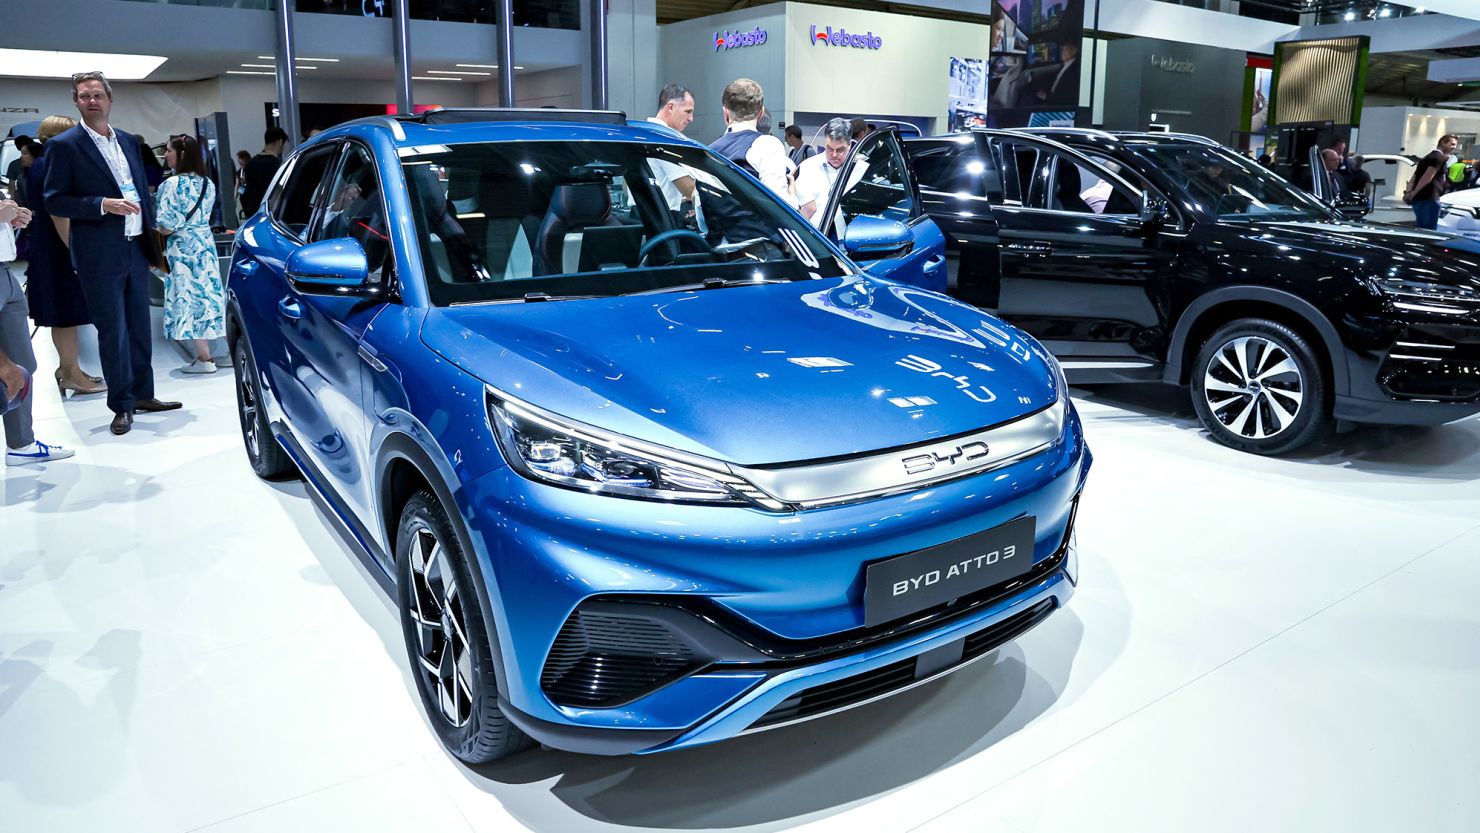 China's BYD is selling more electric cars than Tesla